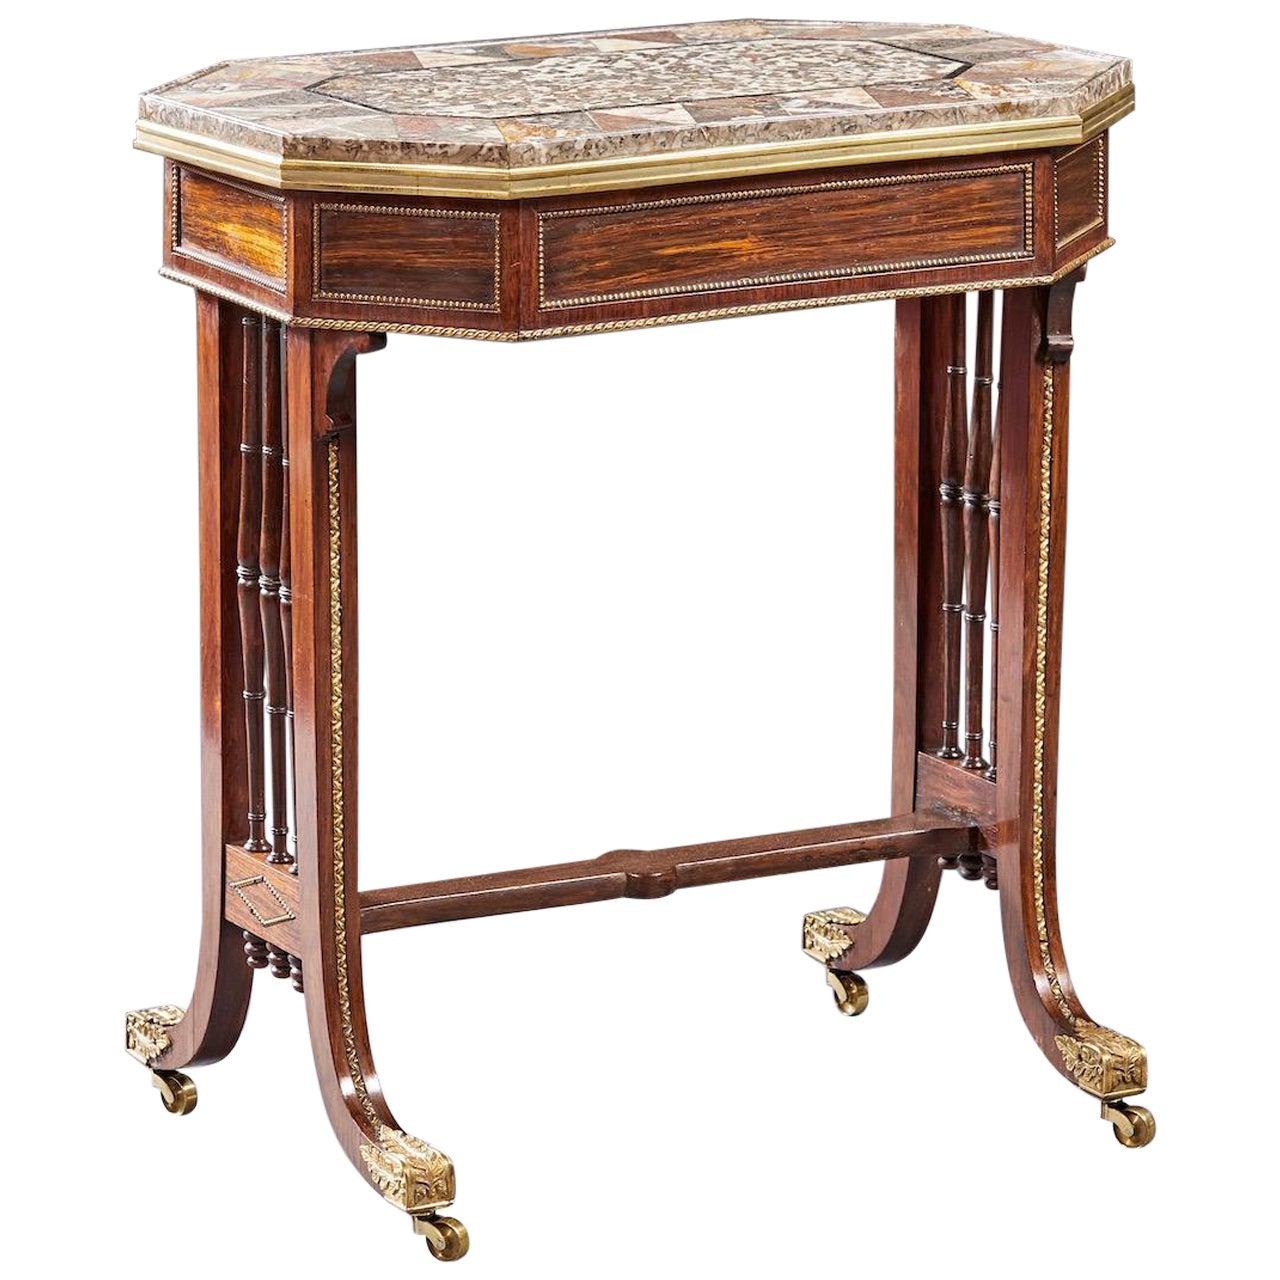 Rare English Regency Period Specimen Marble Table Attributed to Gillows For Sale